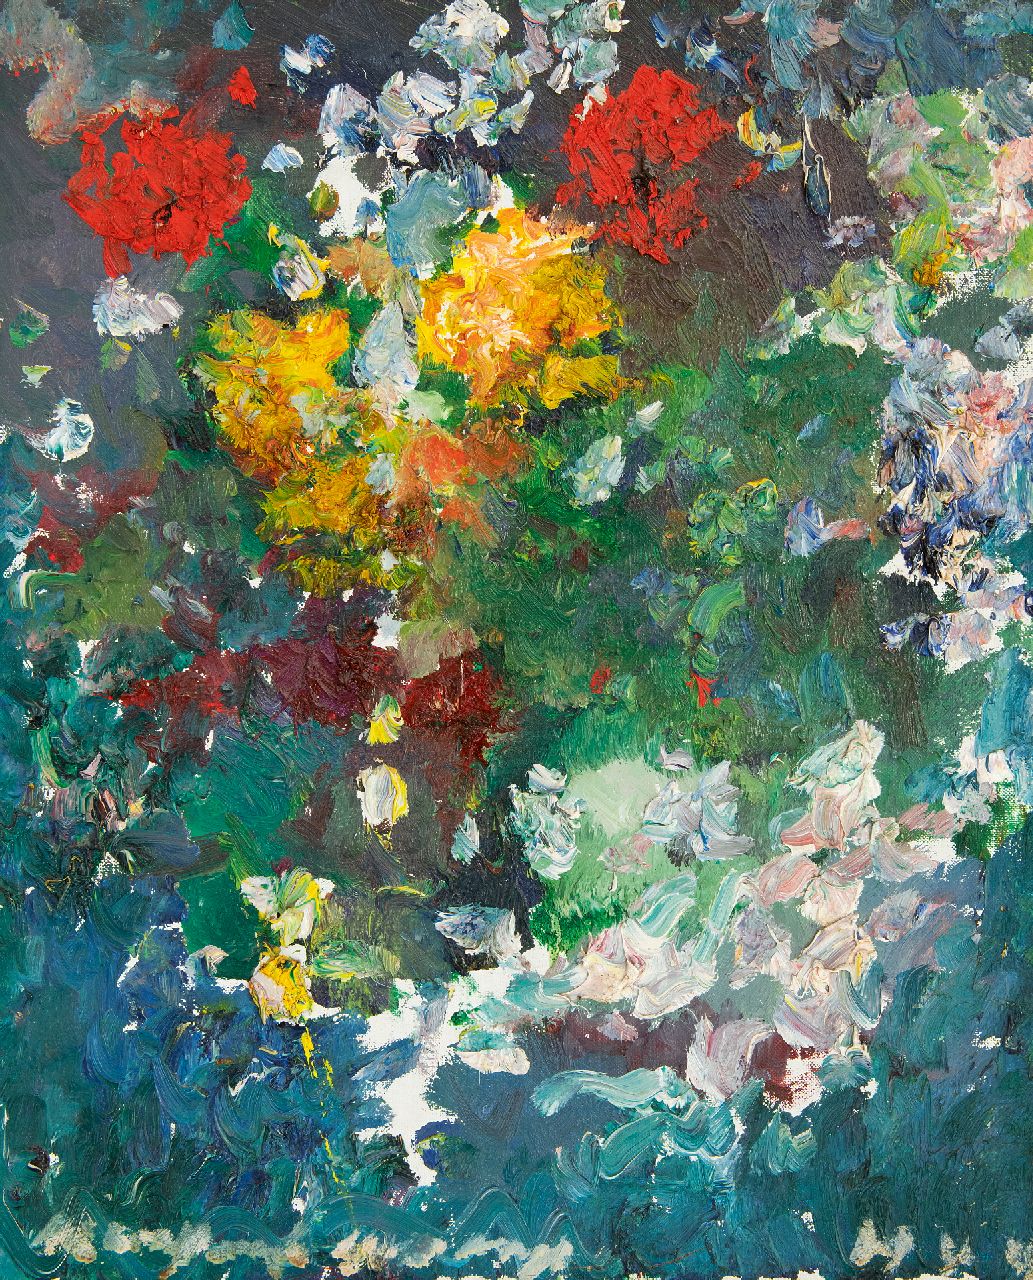 Verwey K.  | Kees Verwey | Paintings offered for sale | Flowers, oil on canvas 50.0 x 39.7 cm, signed l.l. and on the reverse and verso dated '83